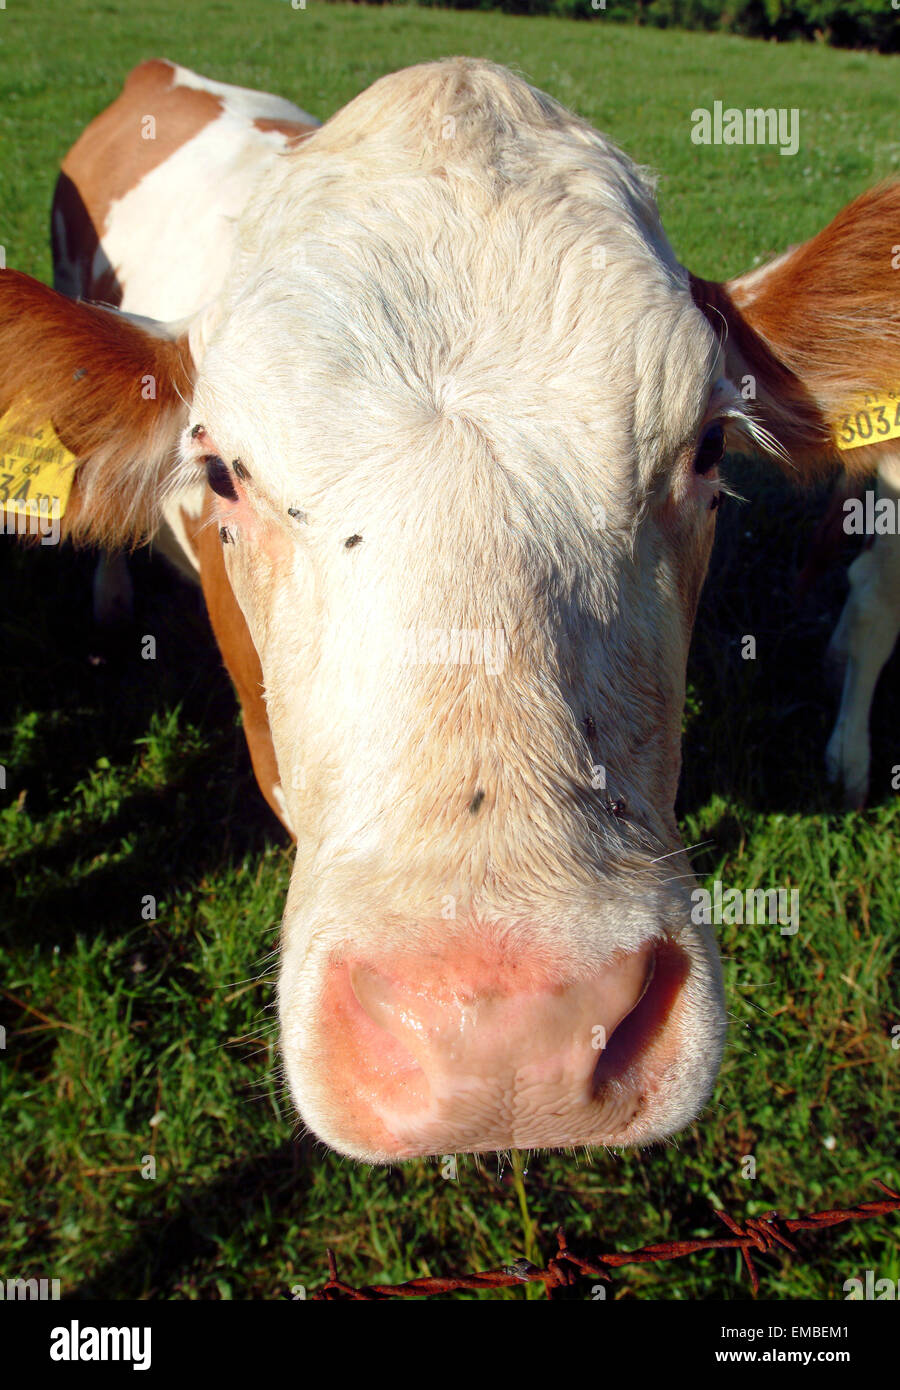 Cow red white looks in camera austria europe Stock Photo